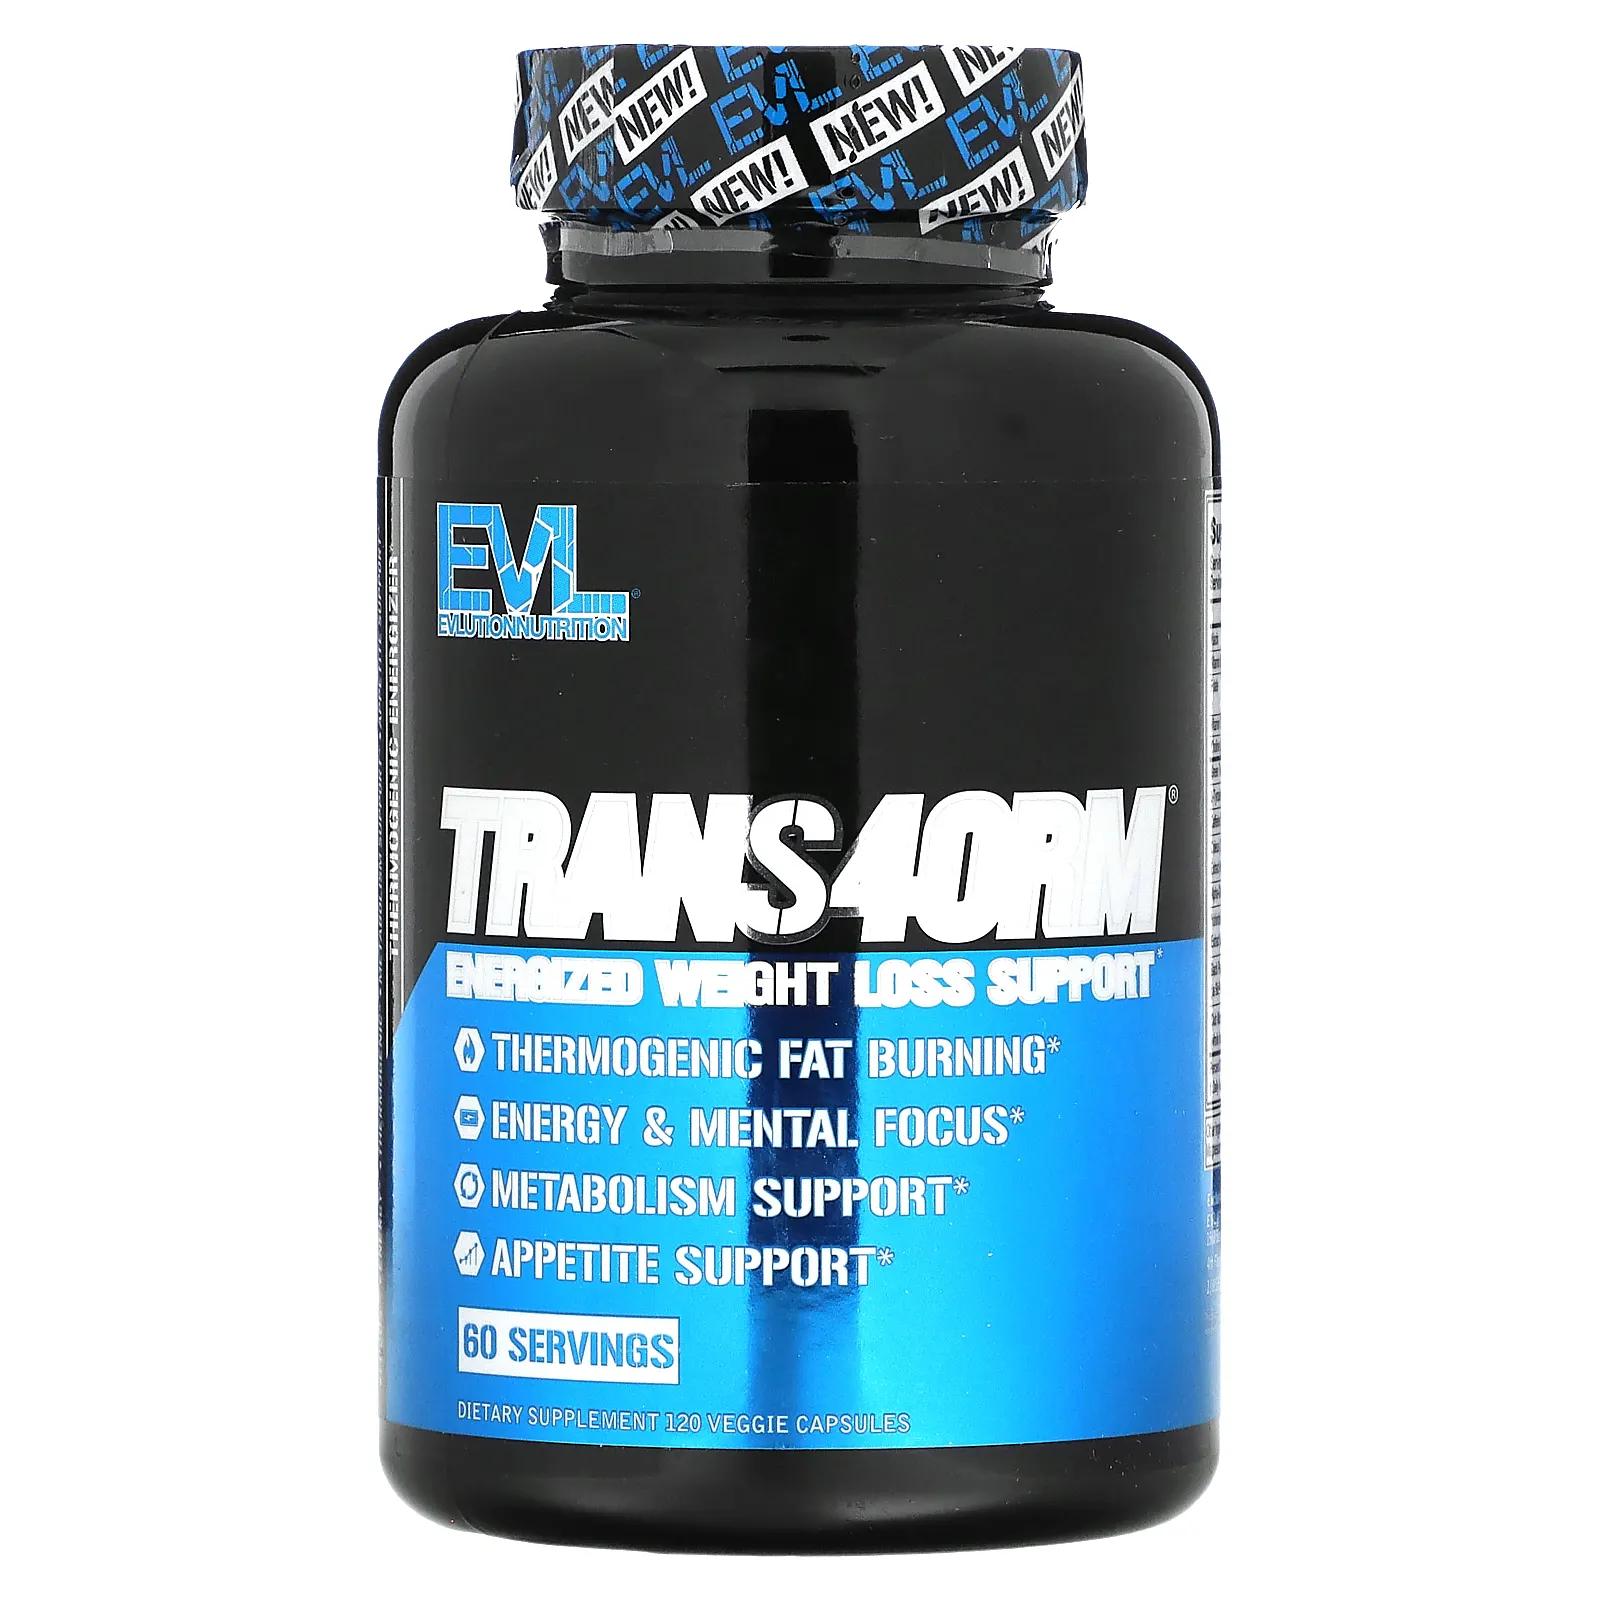 EVLution Nutrition Trans4orm Thermogenic Energizing Fat Burner Supplement 120 Capsules цена и фото